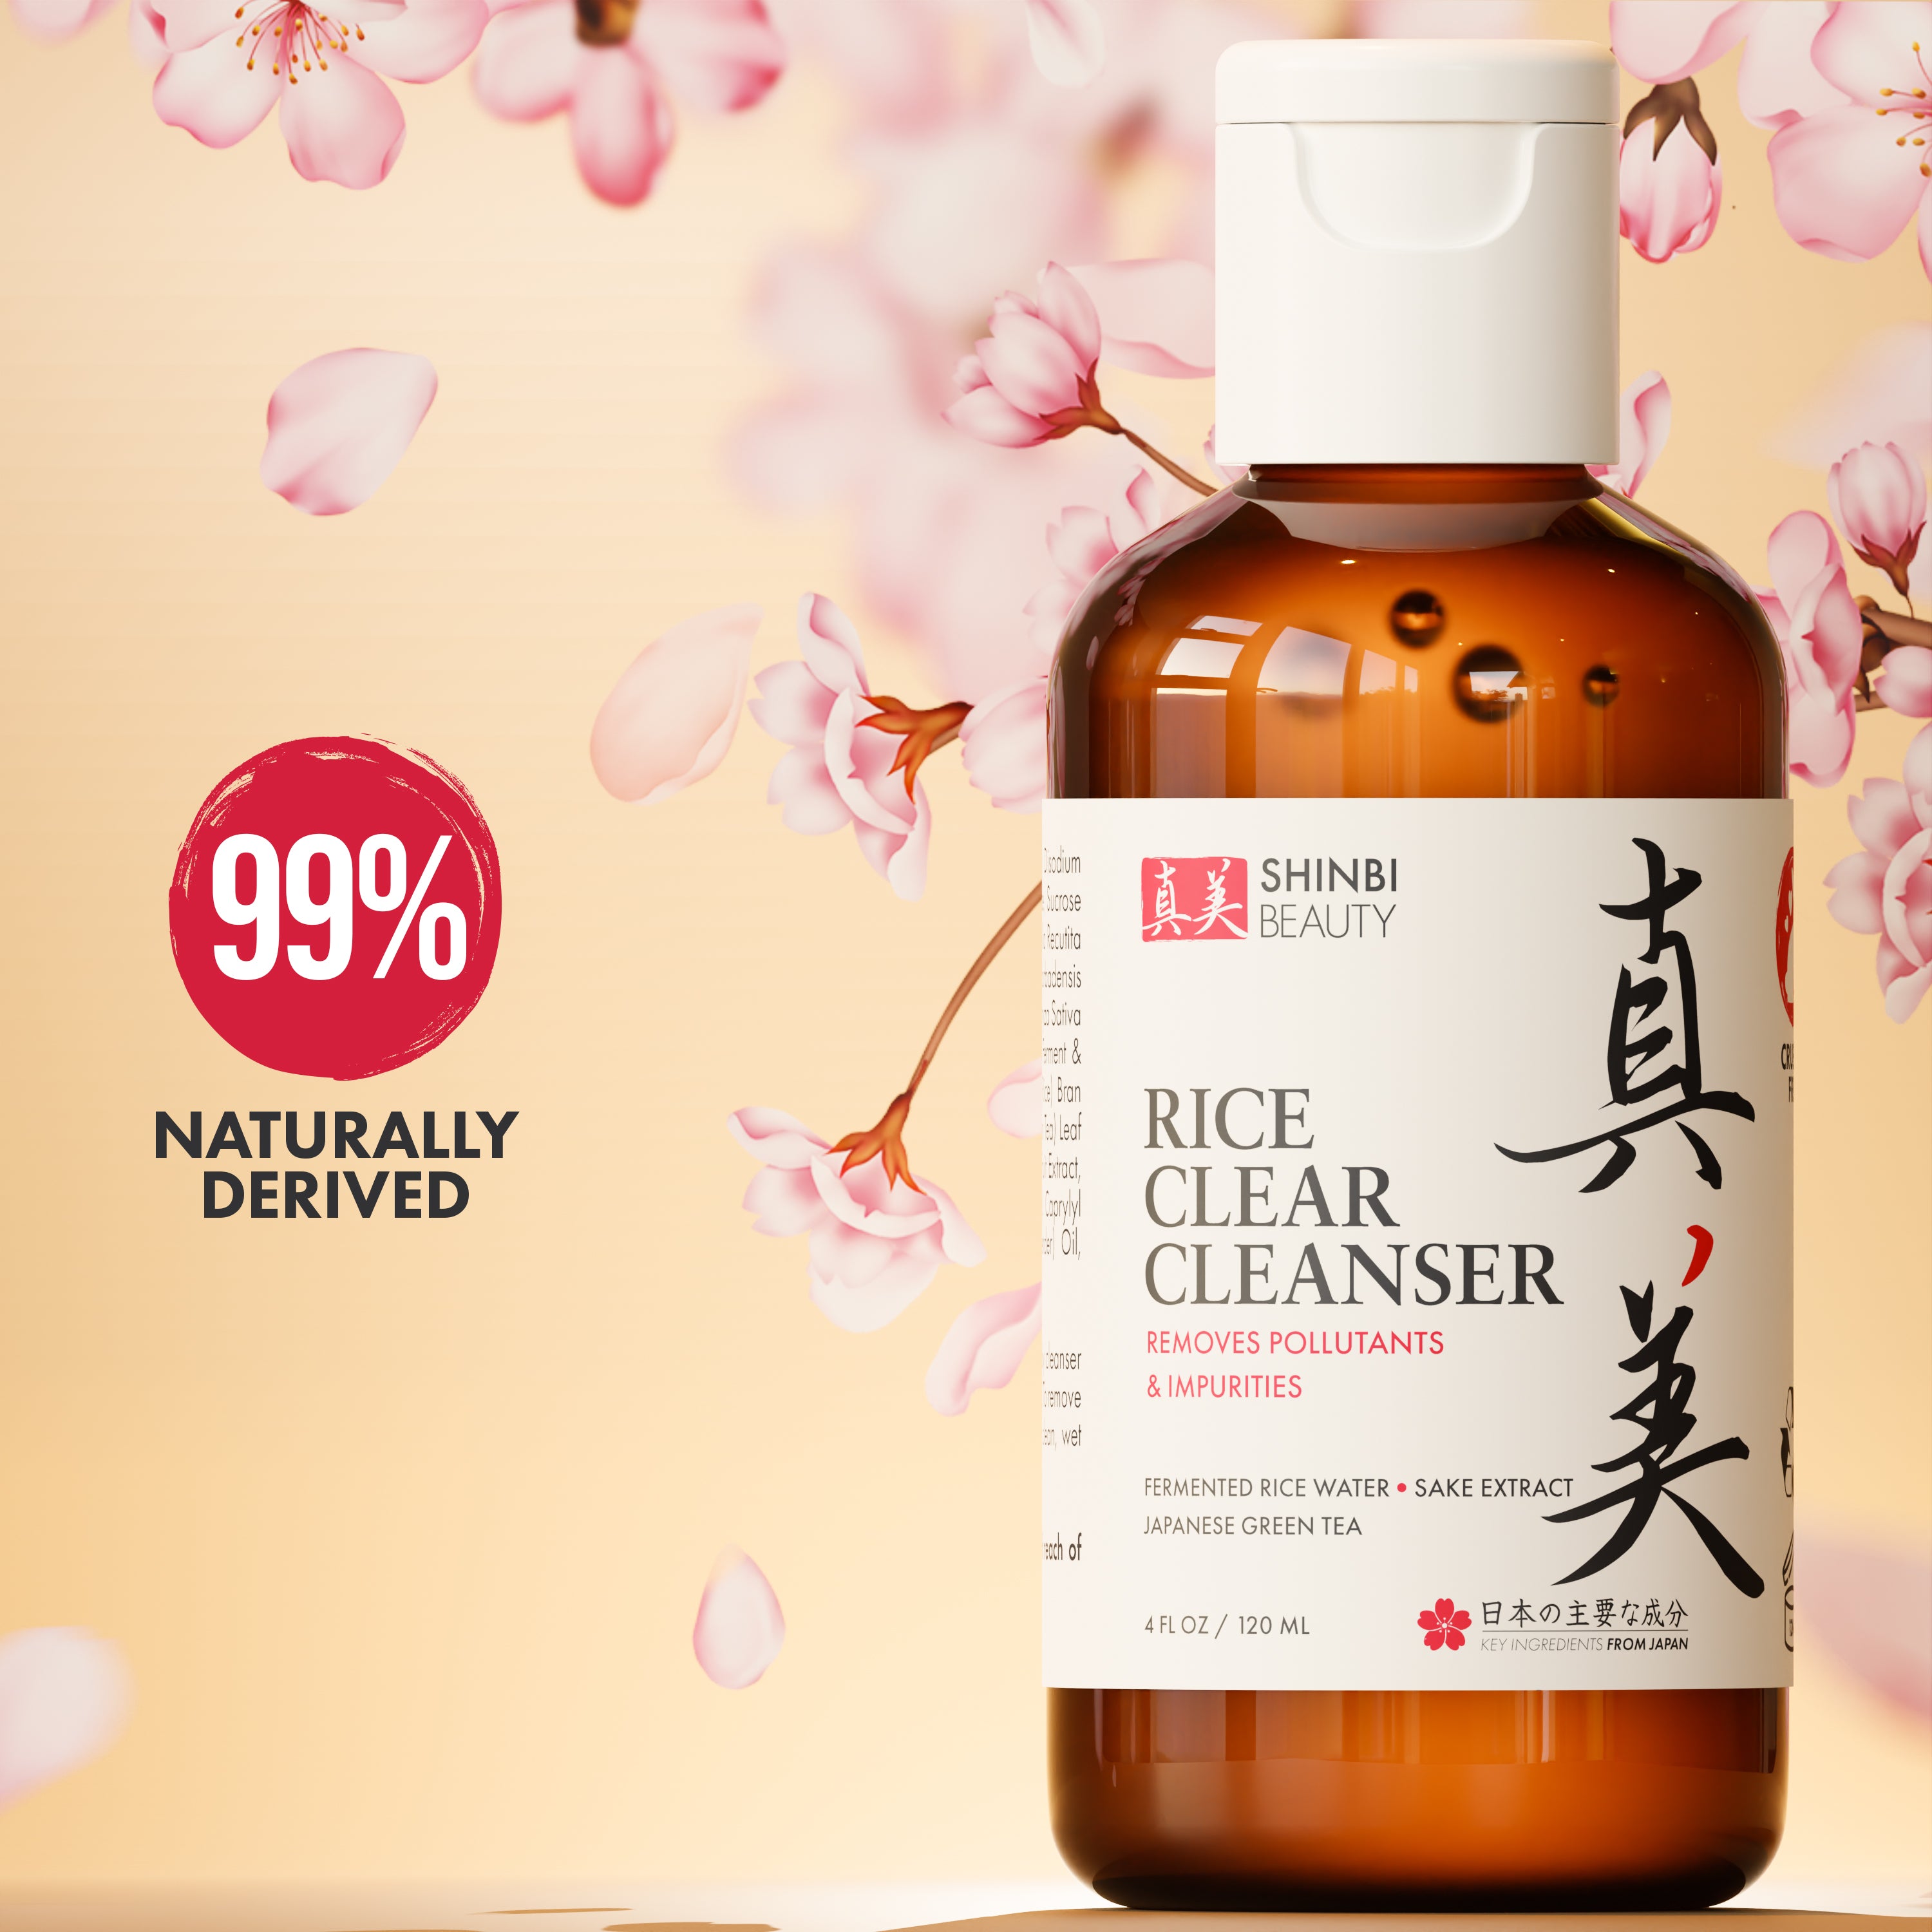 Rice Clear Cleanser